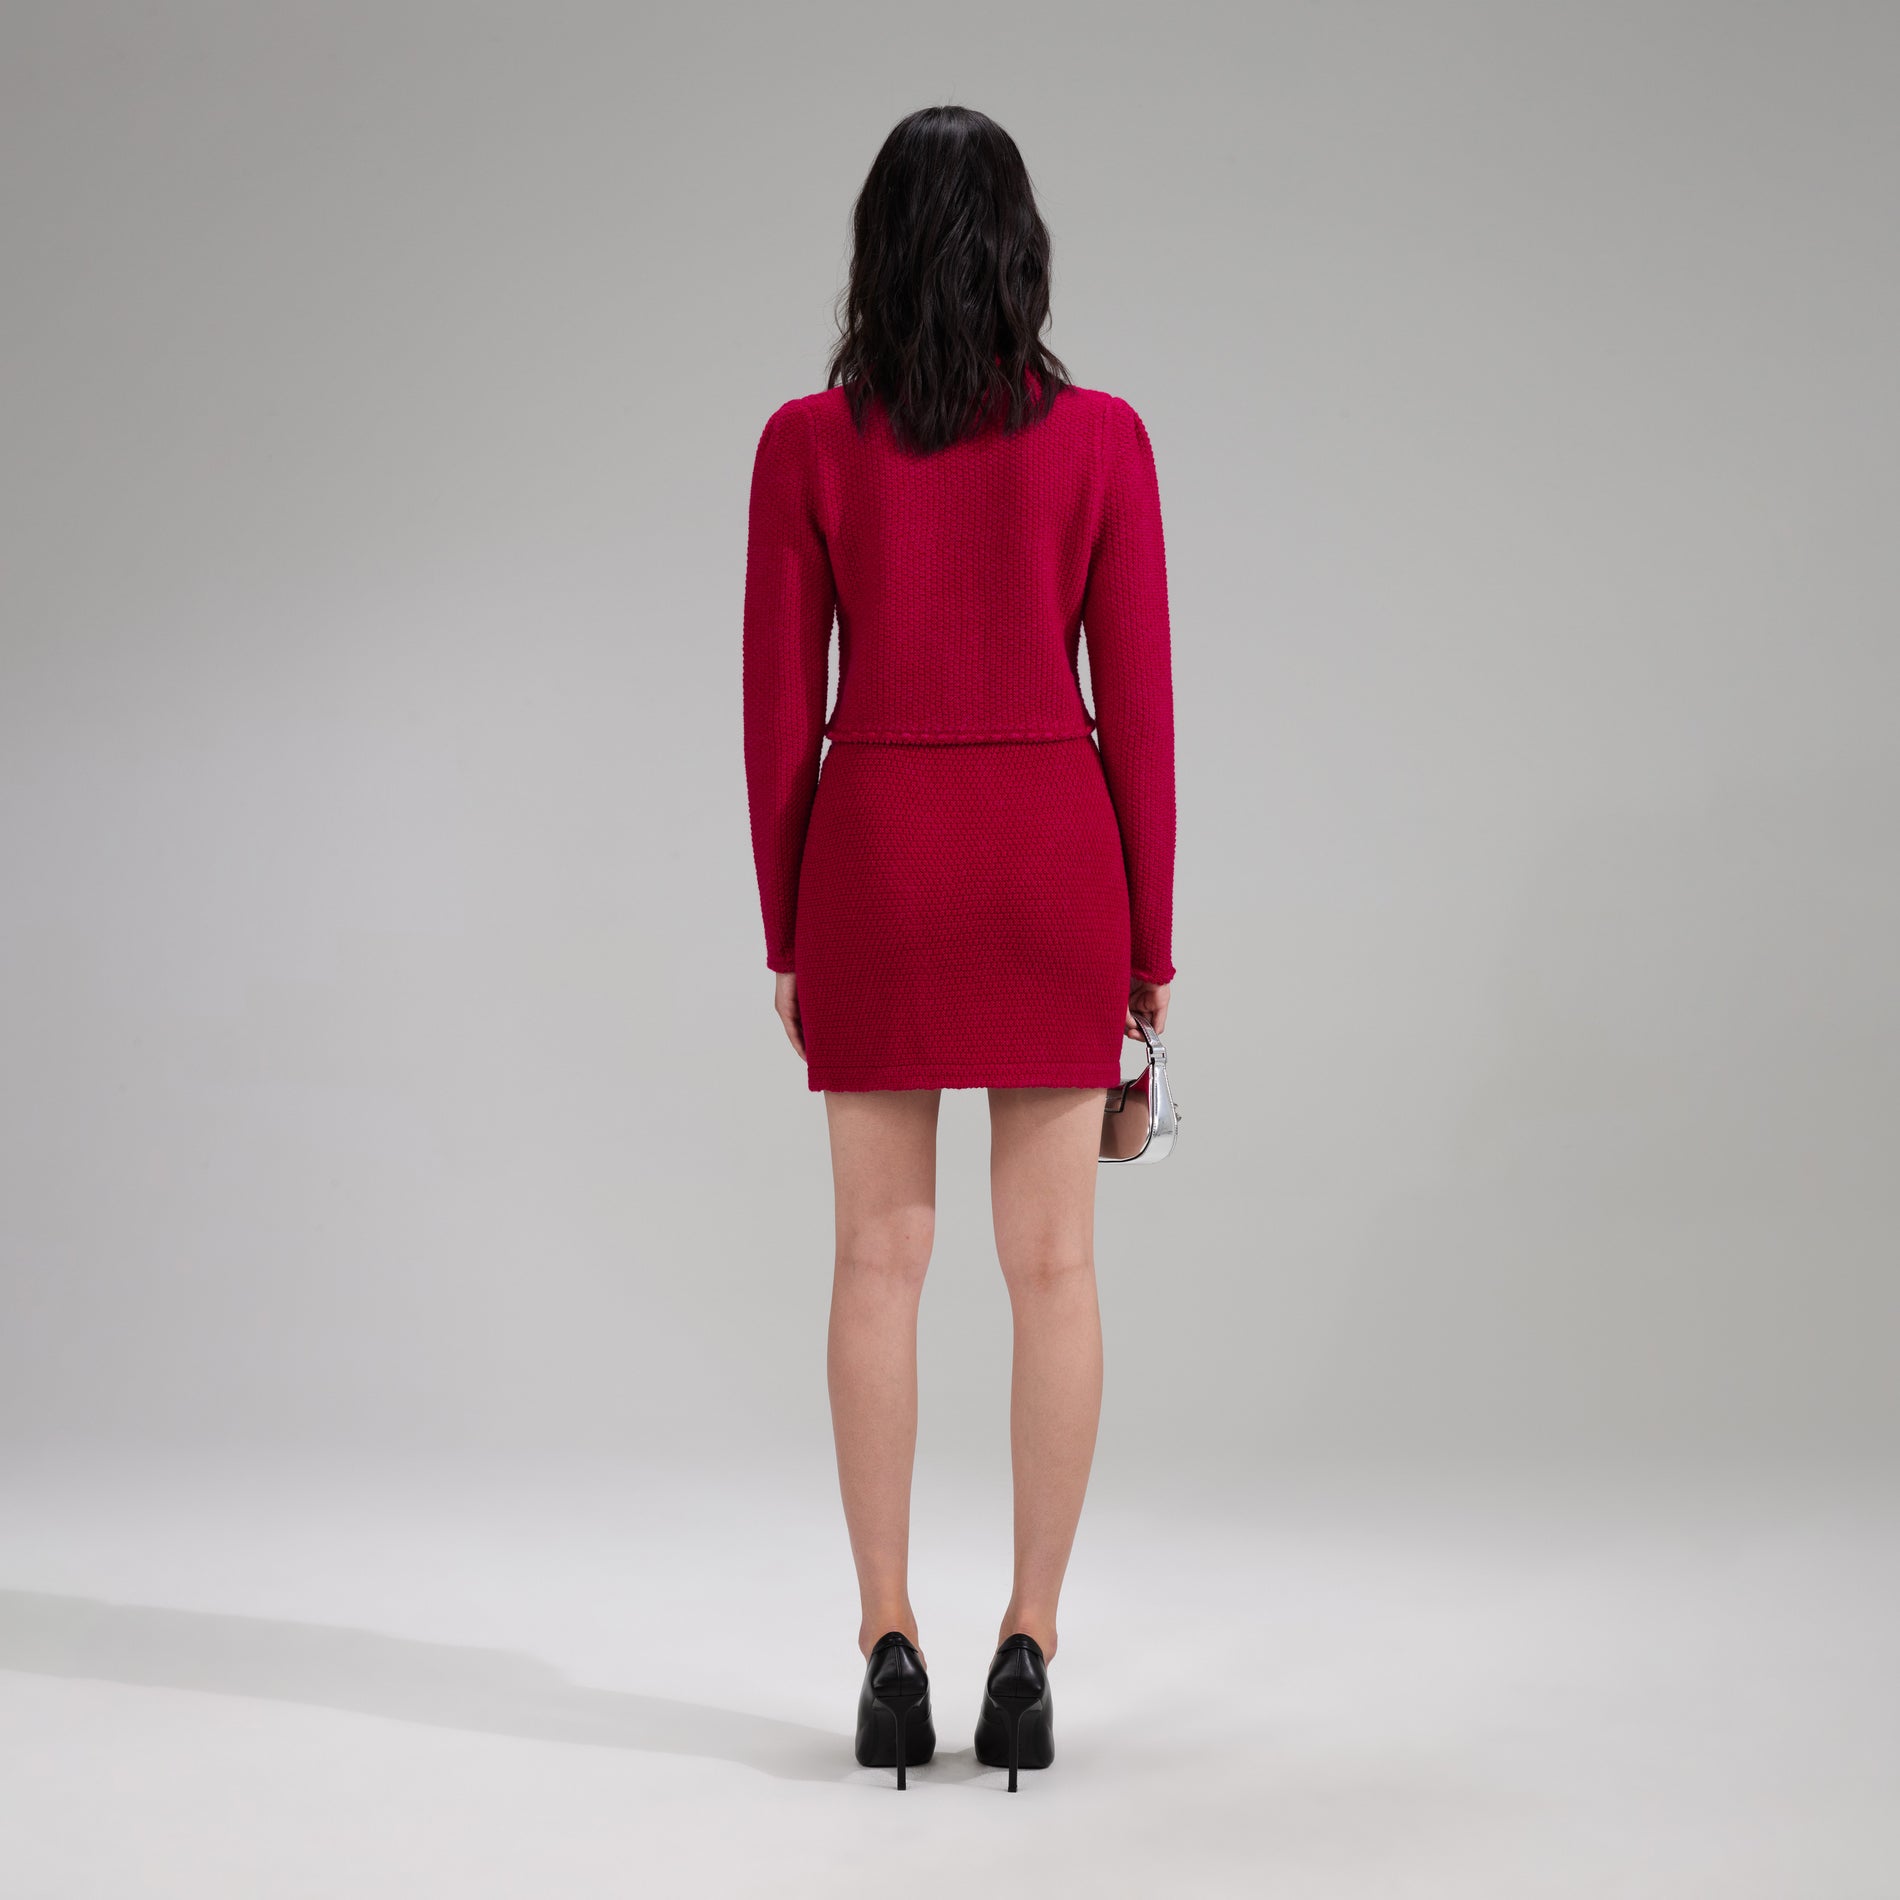 A woman wearing the Red Melange Knit Button Mini Skirt